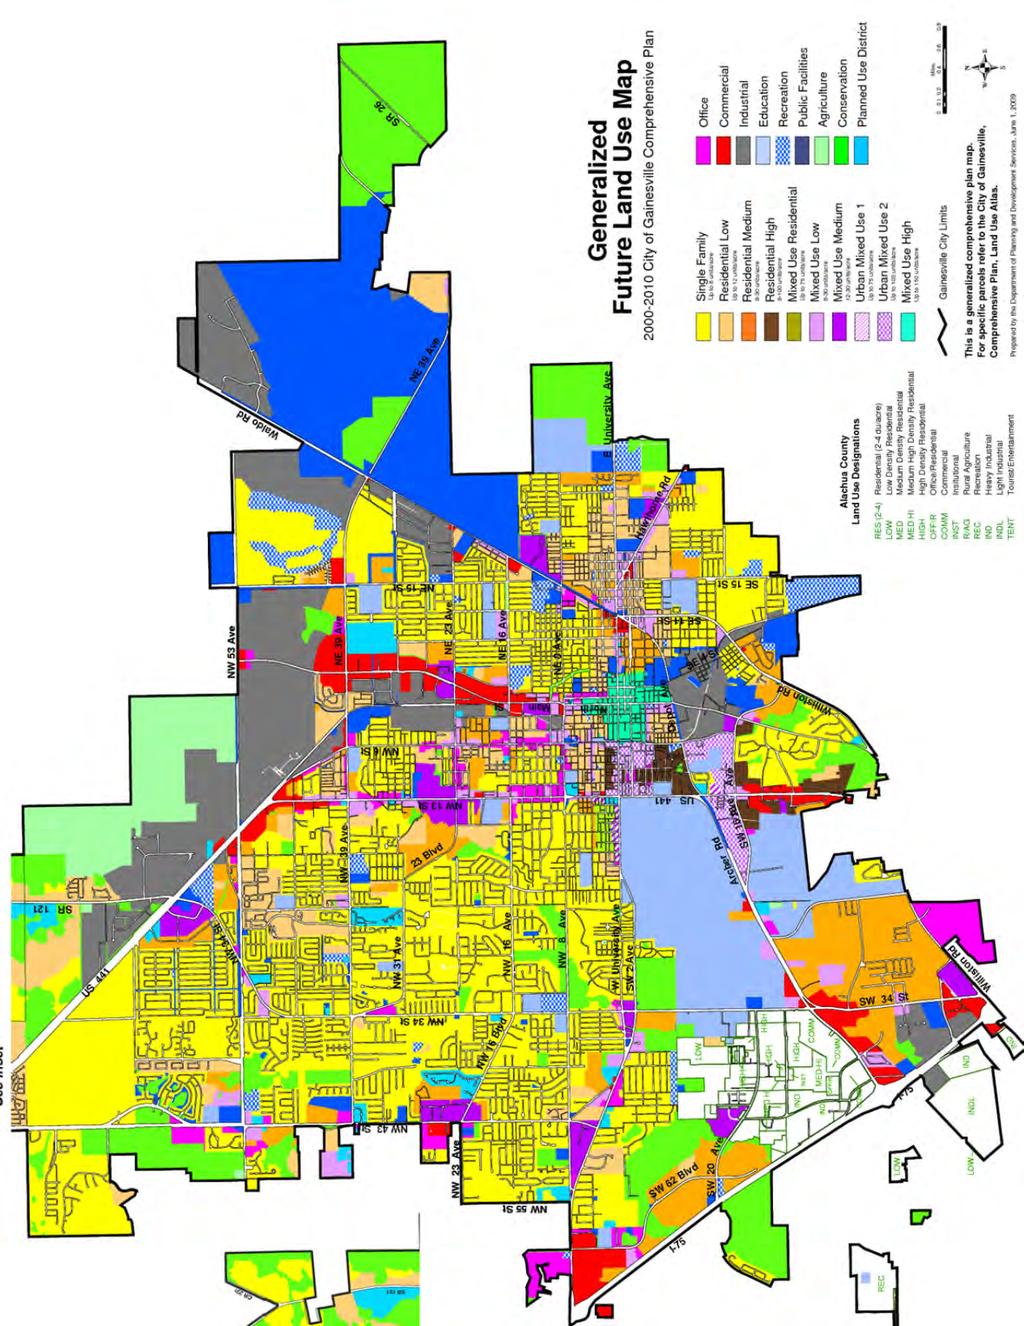 To view full-size map, visi: hp://www.ciyofgainesville.org/porals/0/plan/cg_l U_Map_11X17.